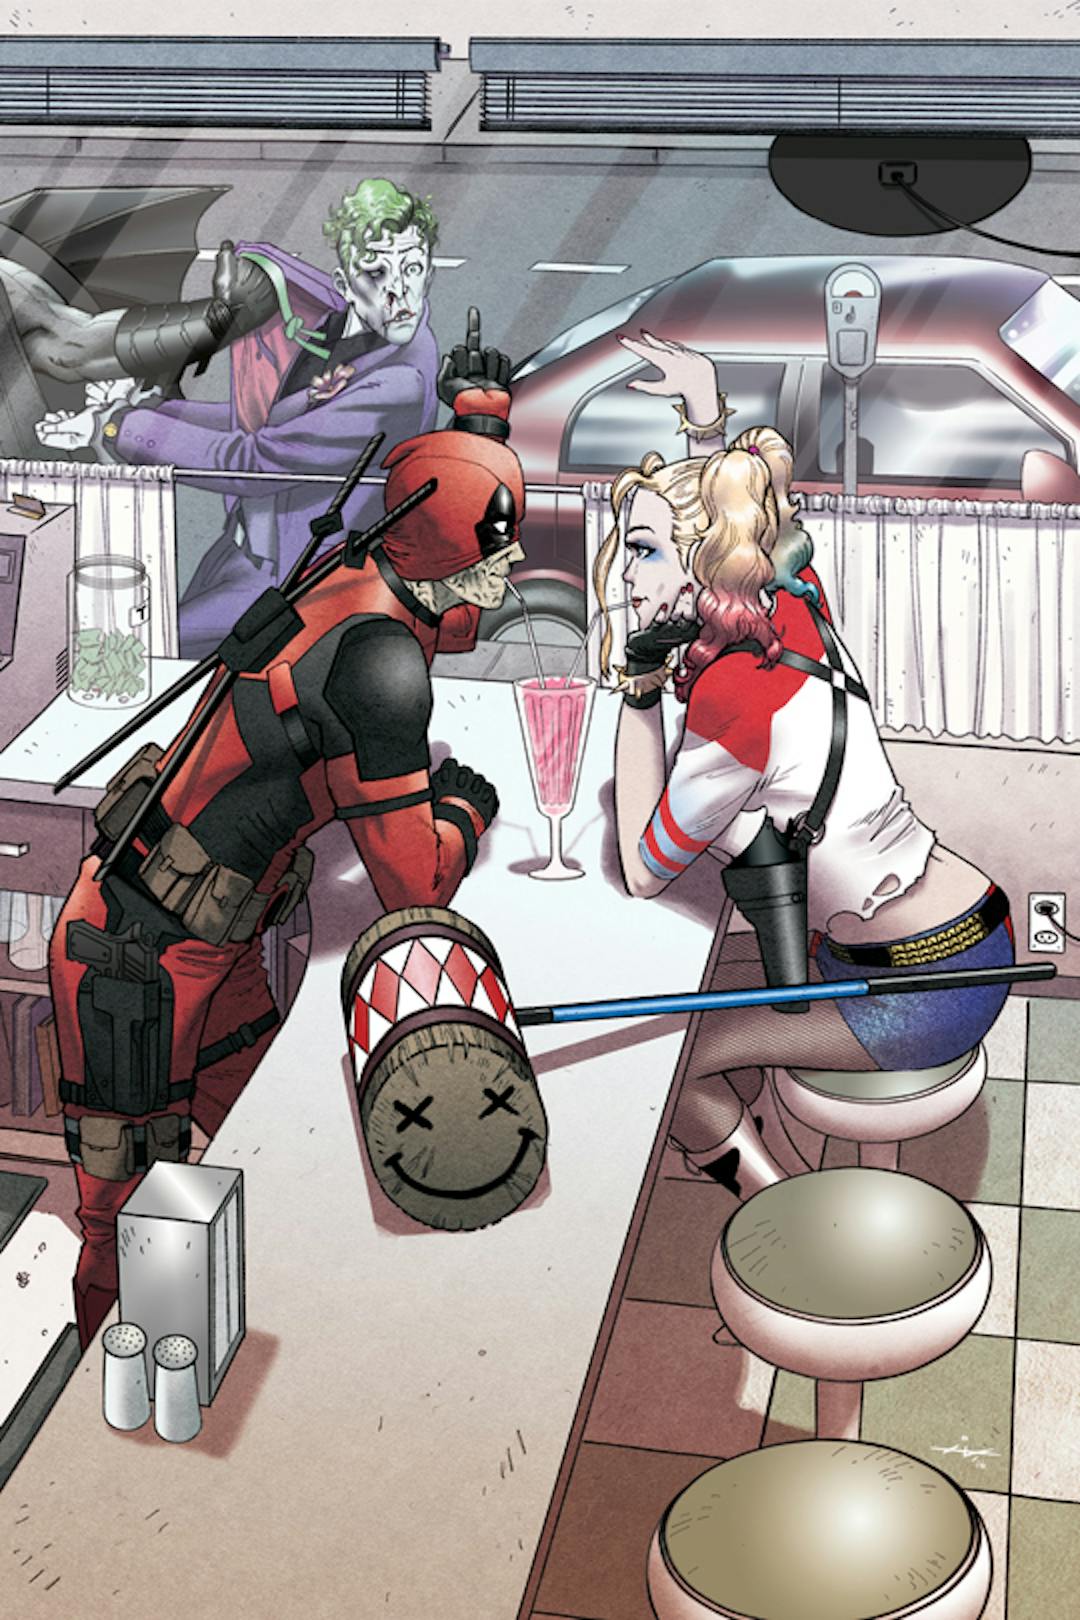 Beloved Artist Ships Harley And Deadpool Who Dominated 2016 Inverse